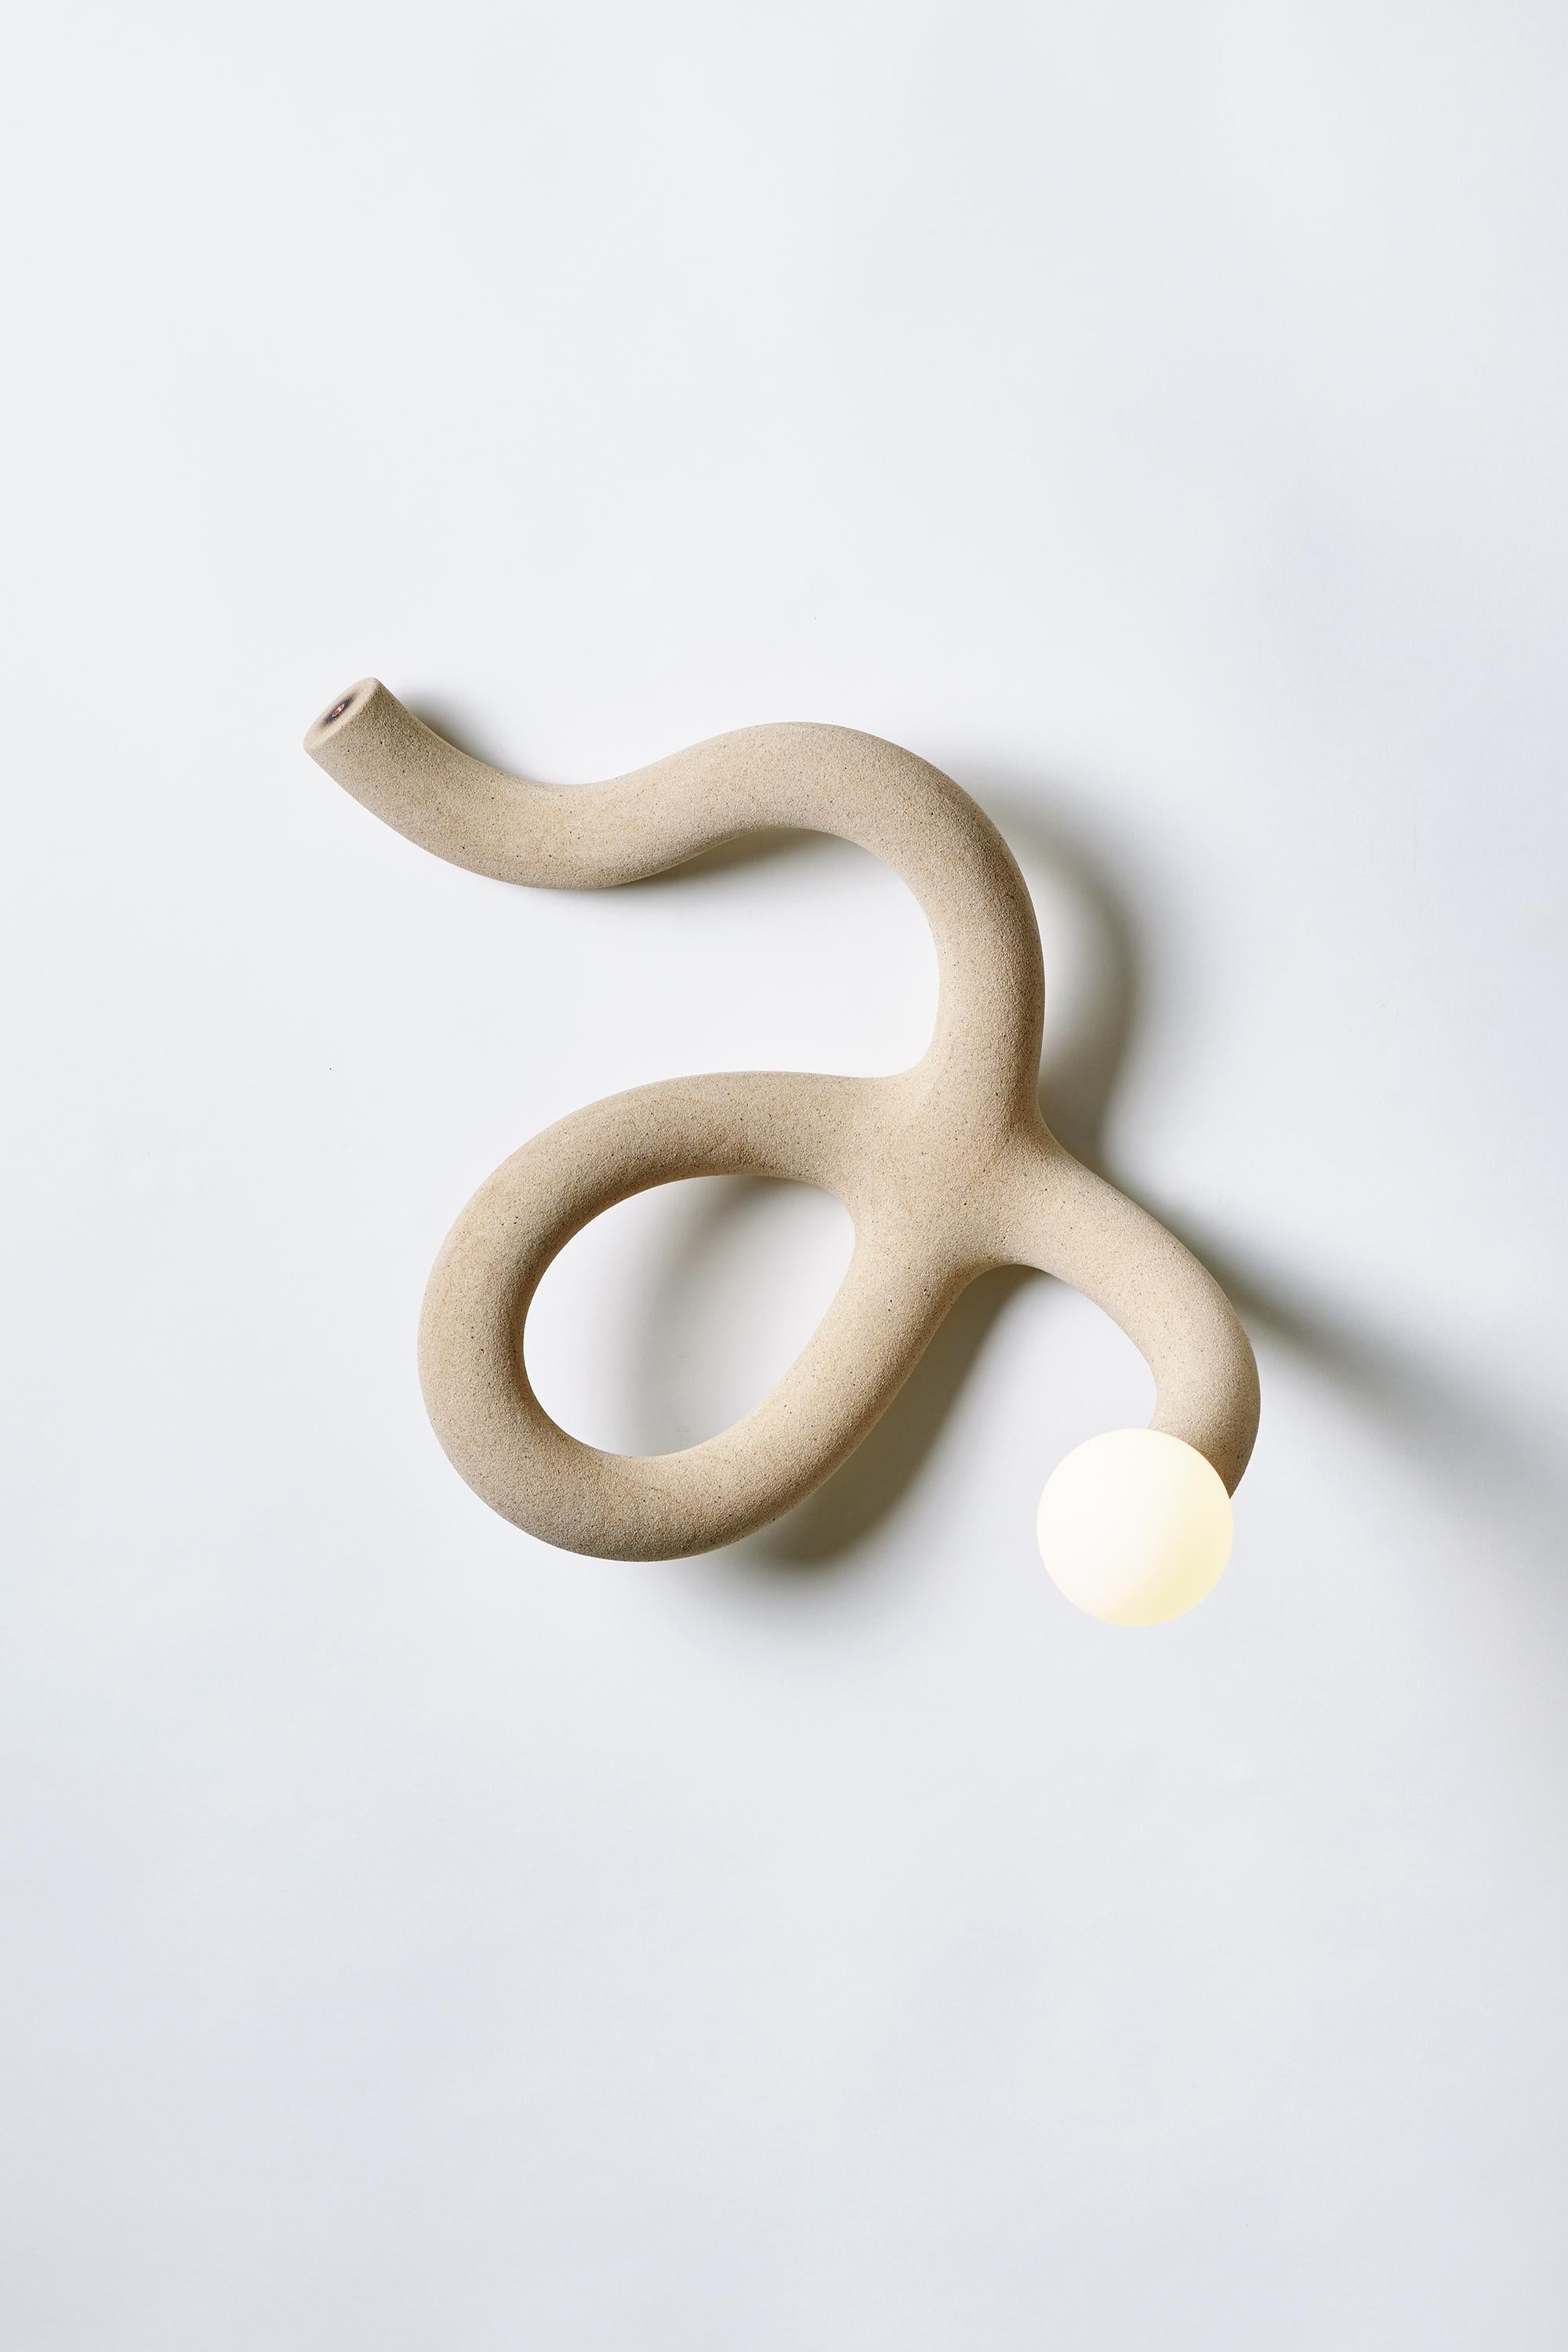 Native Object 14 Wall Light by Hot Wire Extensions
Dimensions: D 25 x W 54 x H 43 cm 
Materials: Waste nylon powder, locally sourced beige sand, copper pipe, hand-blown glass bulbs.
4.5 kg

Different sands and colors upon request.

All our lamps can